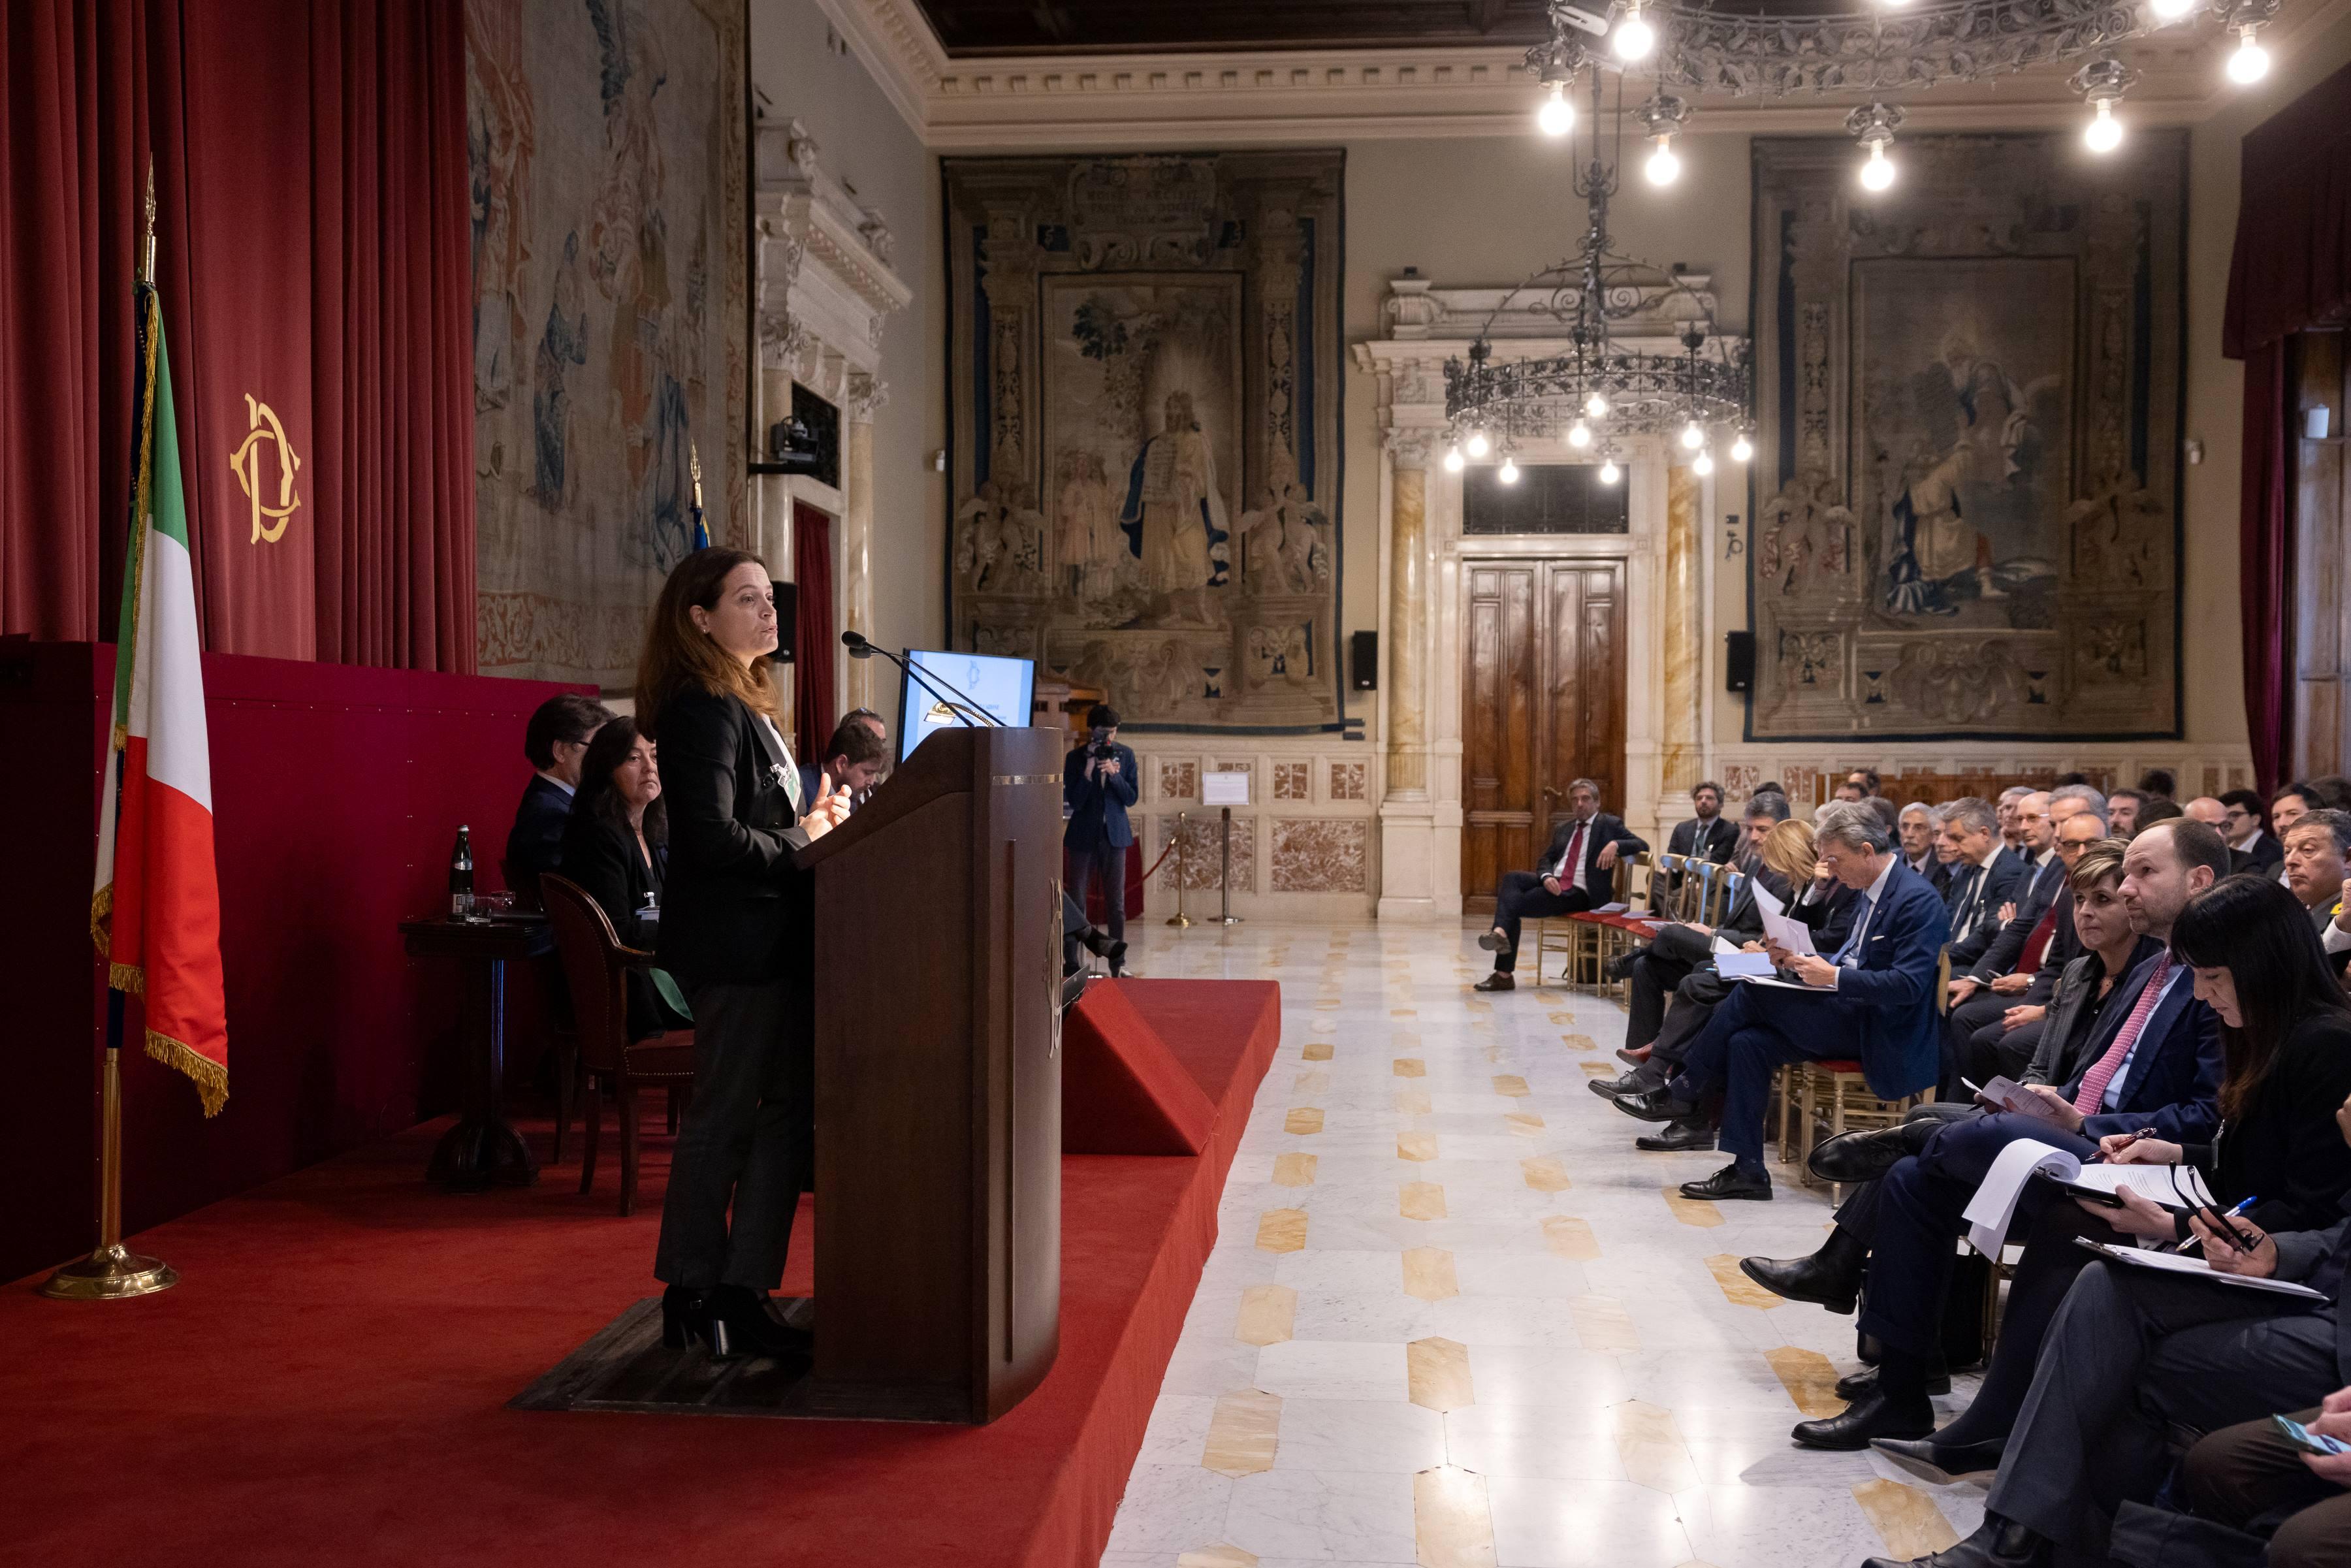 Chiara di Mambro, team member of ECCO during an event. She stands in front of the guests and talks to them